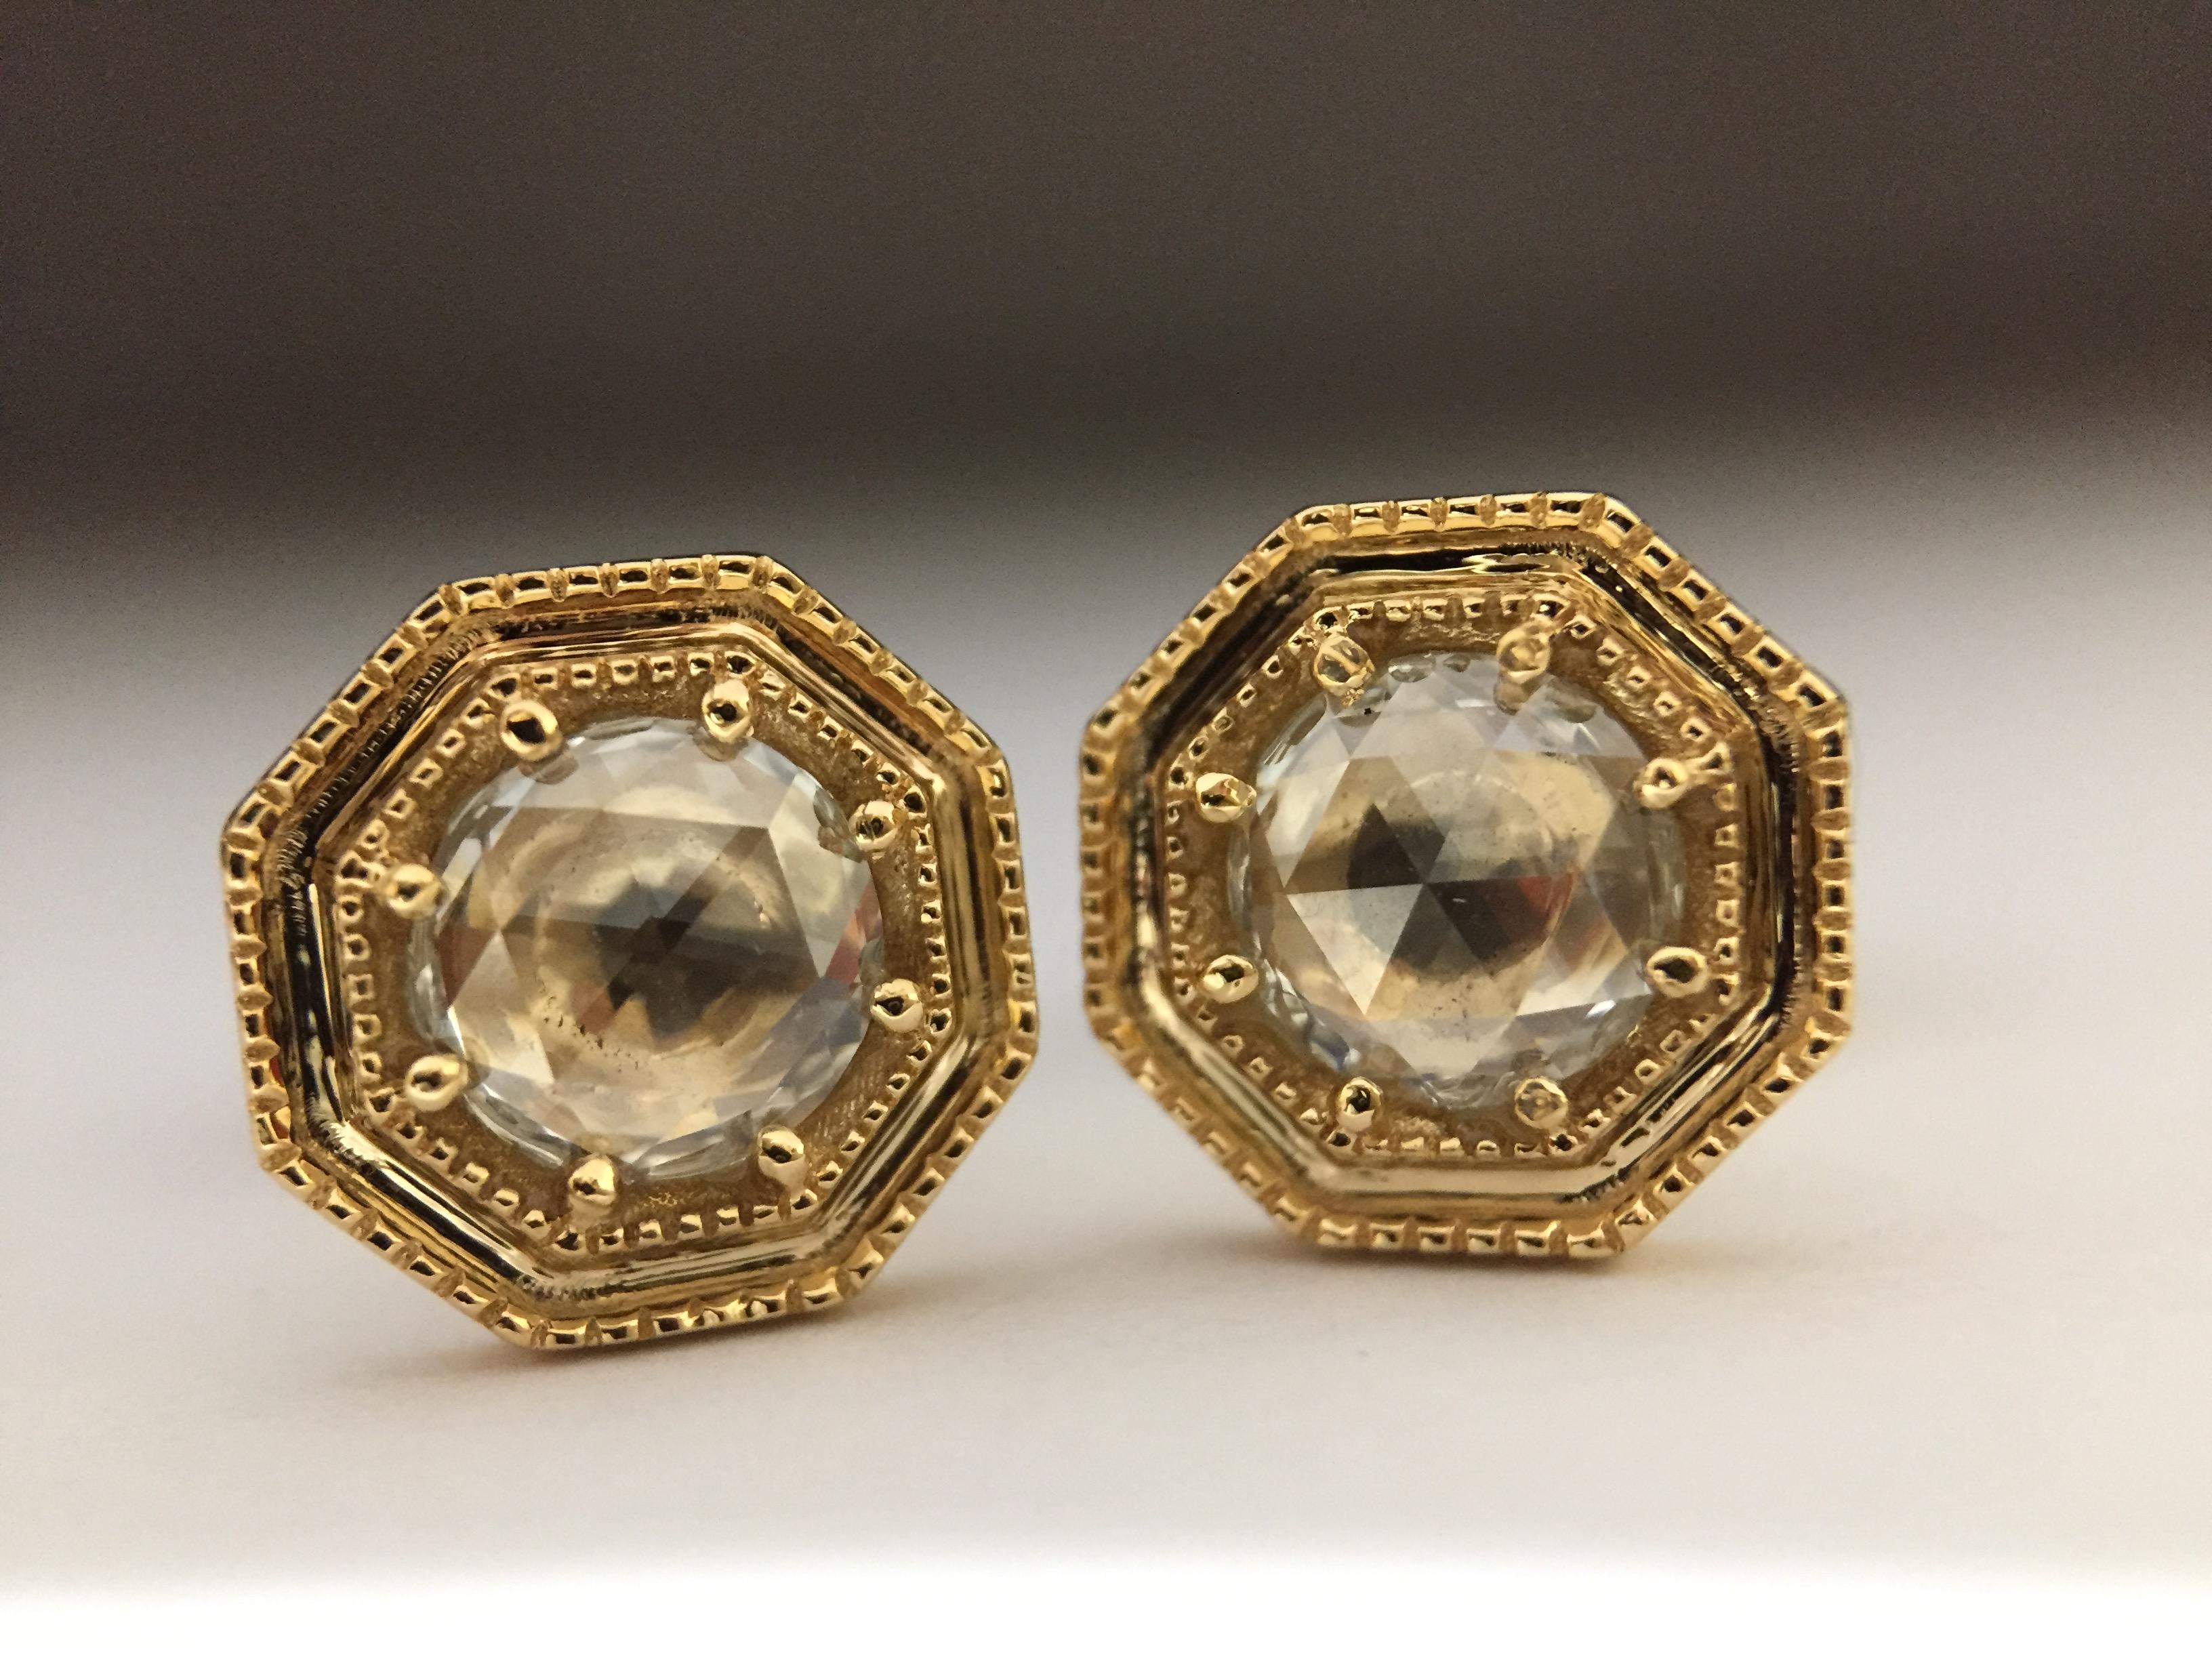 Luca Jouel Rose Cut Diamond Deco Style Stud Earrings in Yellow Gold In New Condition For Sale In South Perth, AU